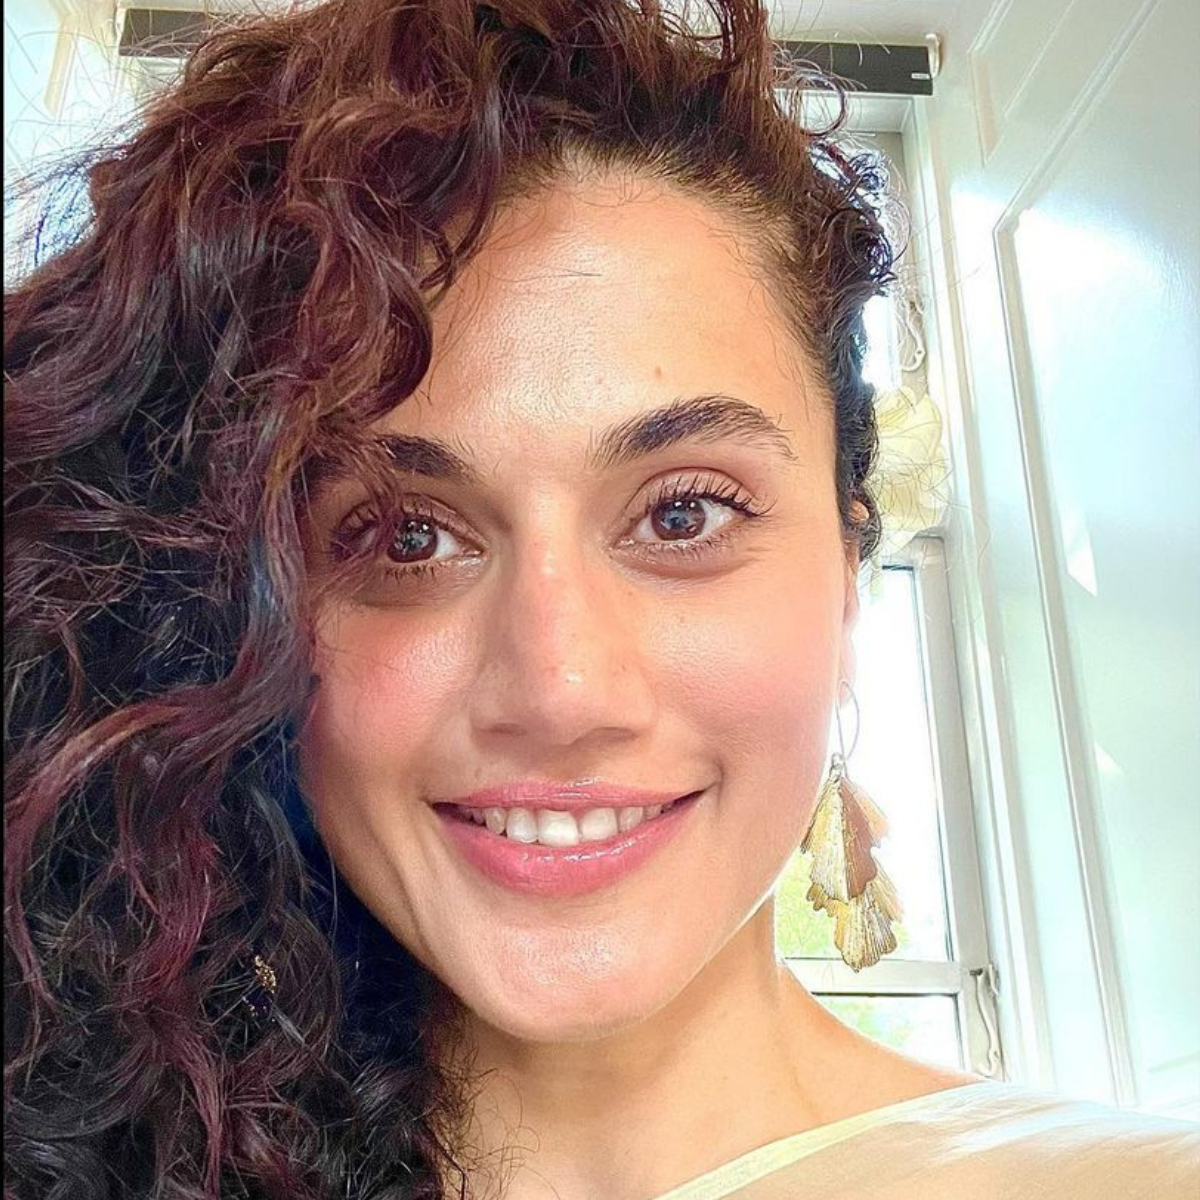 Pannu Tapsi Sex Vedio - Taapsee Pannu takes a dig at Koffee With Karan: My sex life isn't  interesting enough to be invited to the show | PINKVILLA